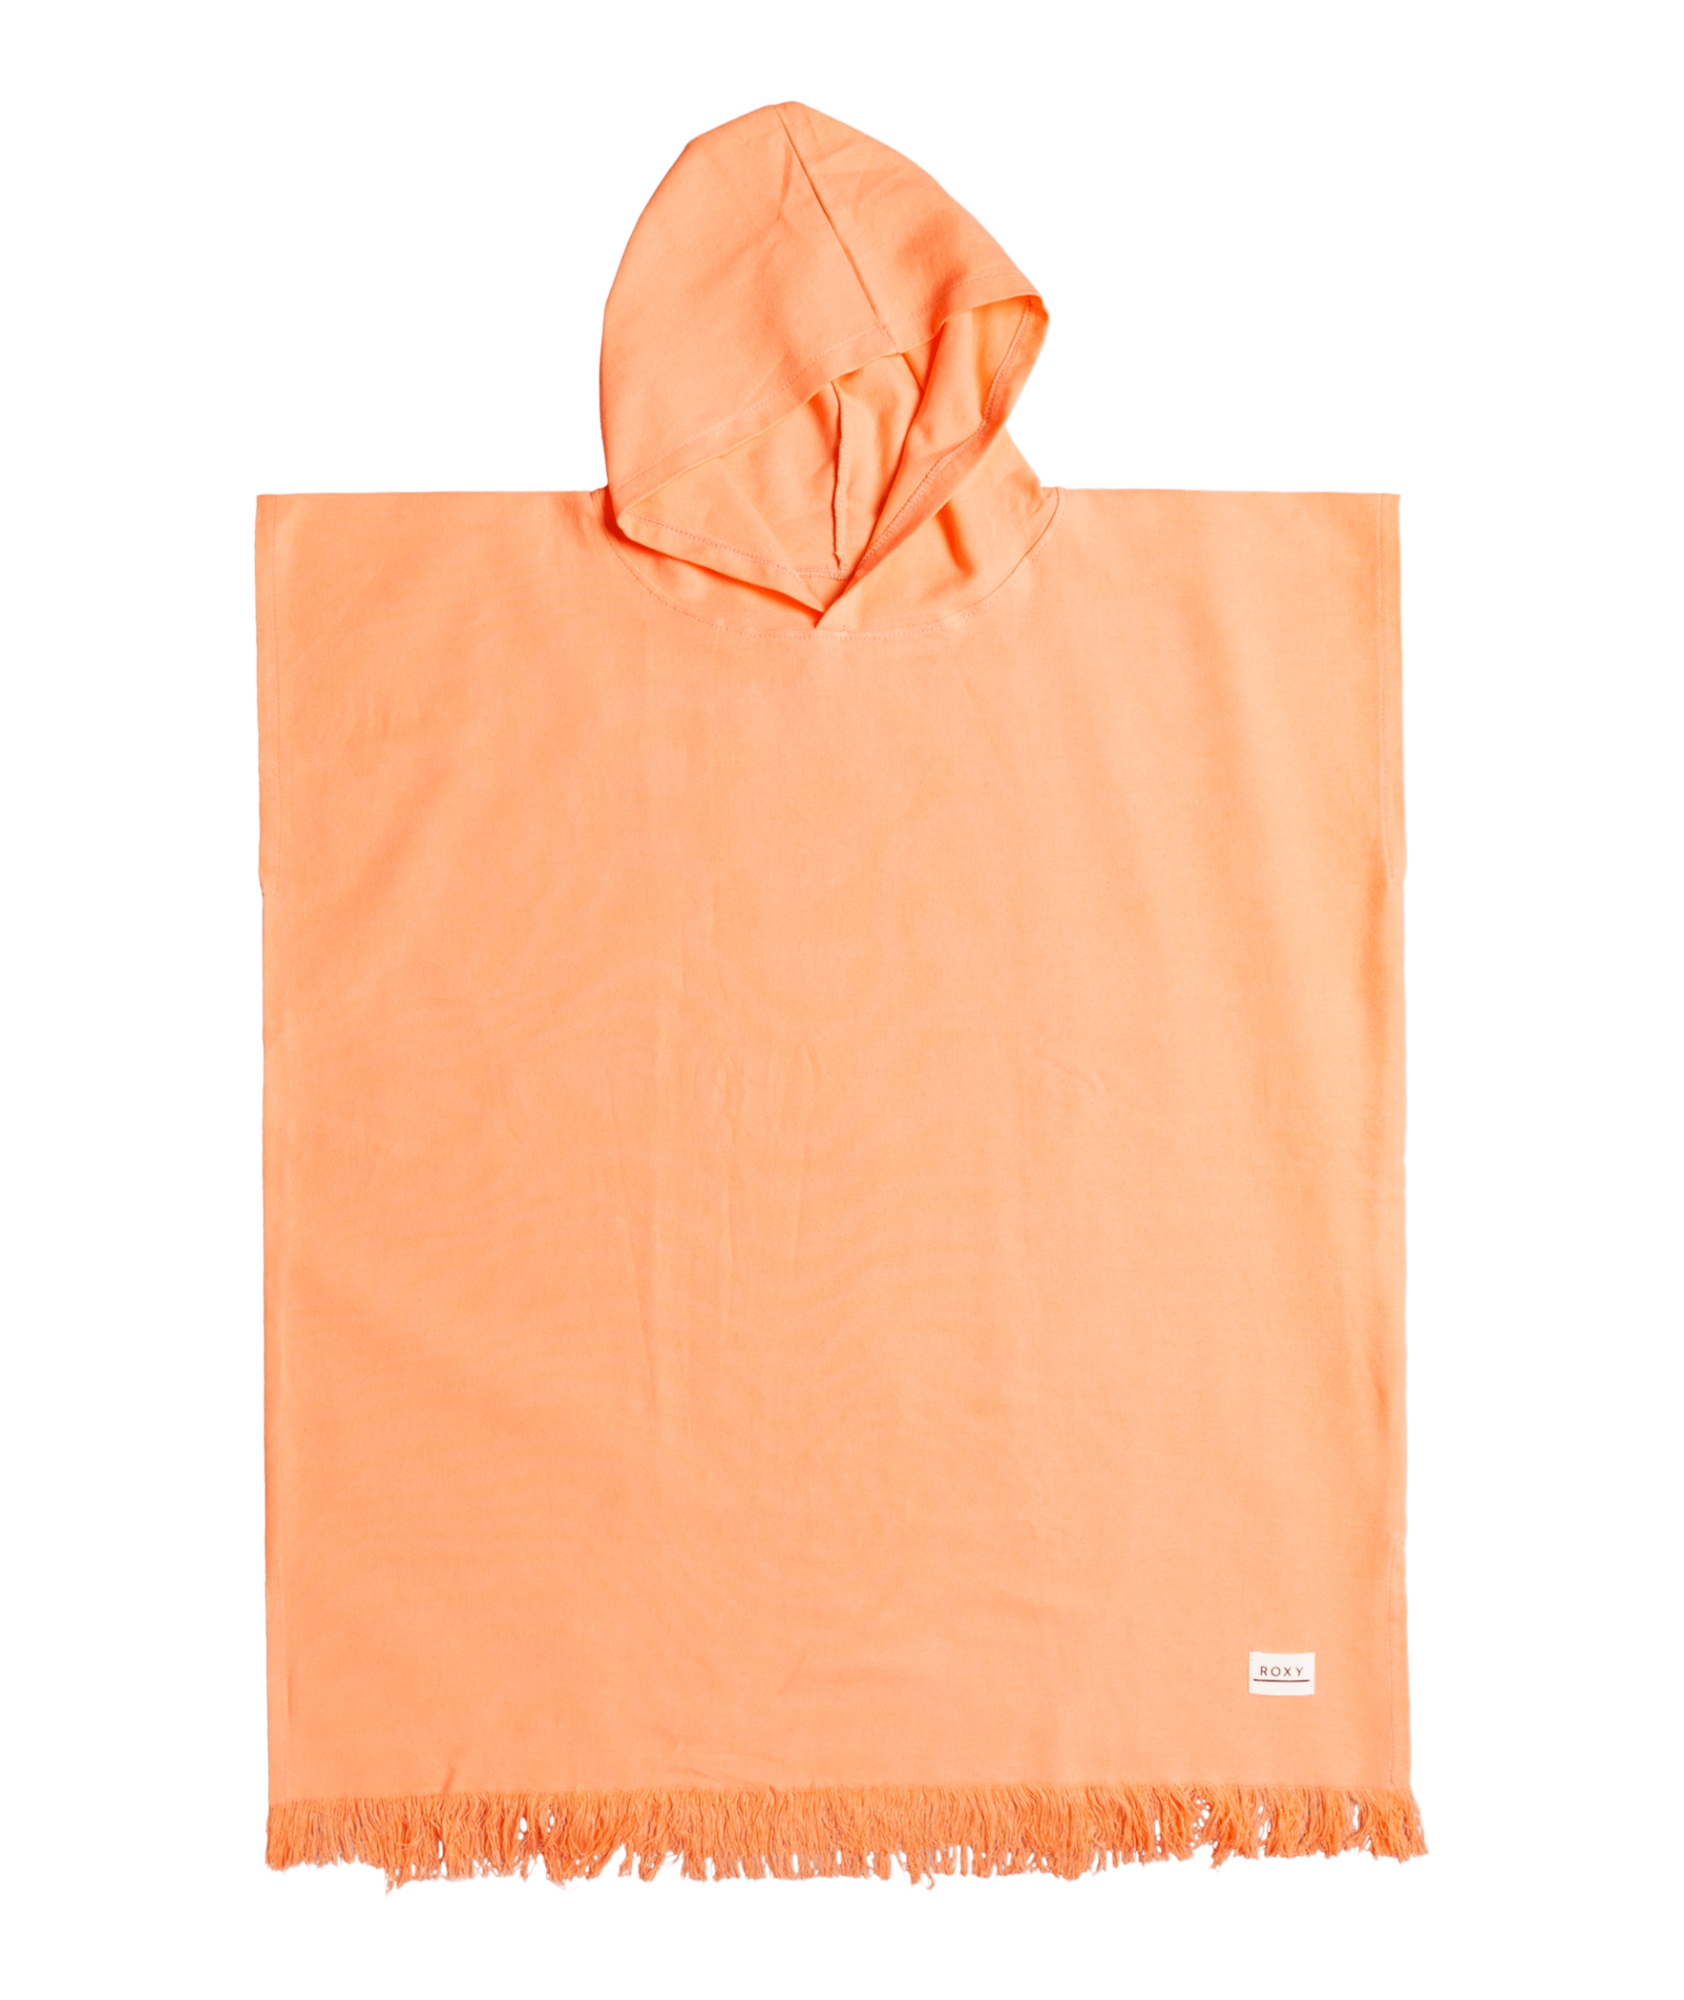 Roxy - Poncho towel for women - Best Beach Town - Cantaloupe